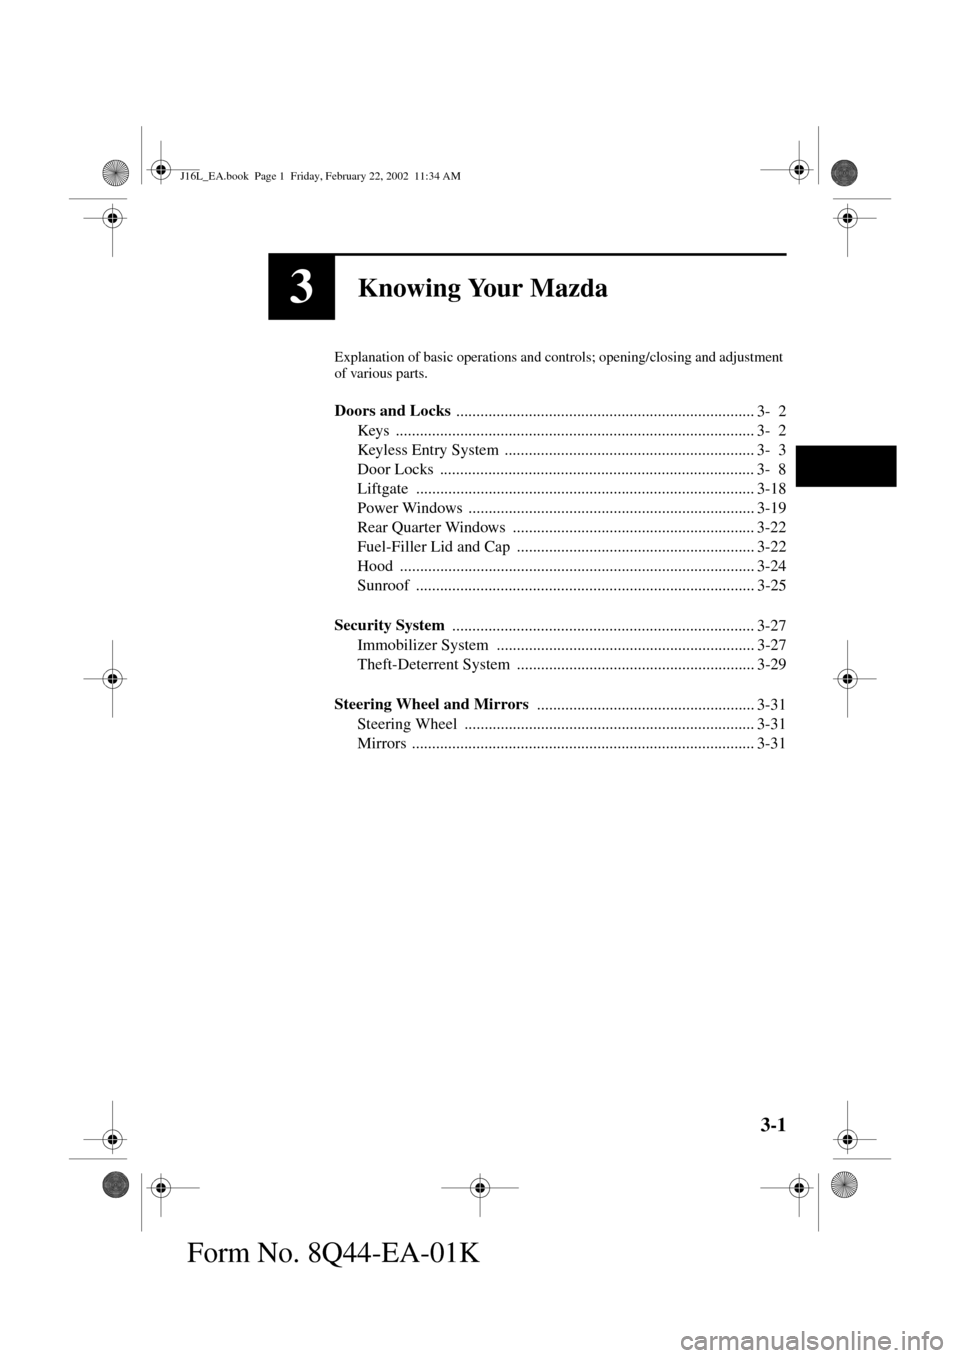 MAZDA MODEL MPV 2002  Owners Manual (in English) 3-1
Form No. 8Q44-EA-01K
3Knowing Your Mazda
Explanation of basic operations and controls; opening/closing and adjustment 
of various parts.
Doors and Locks 
..........................................